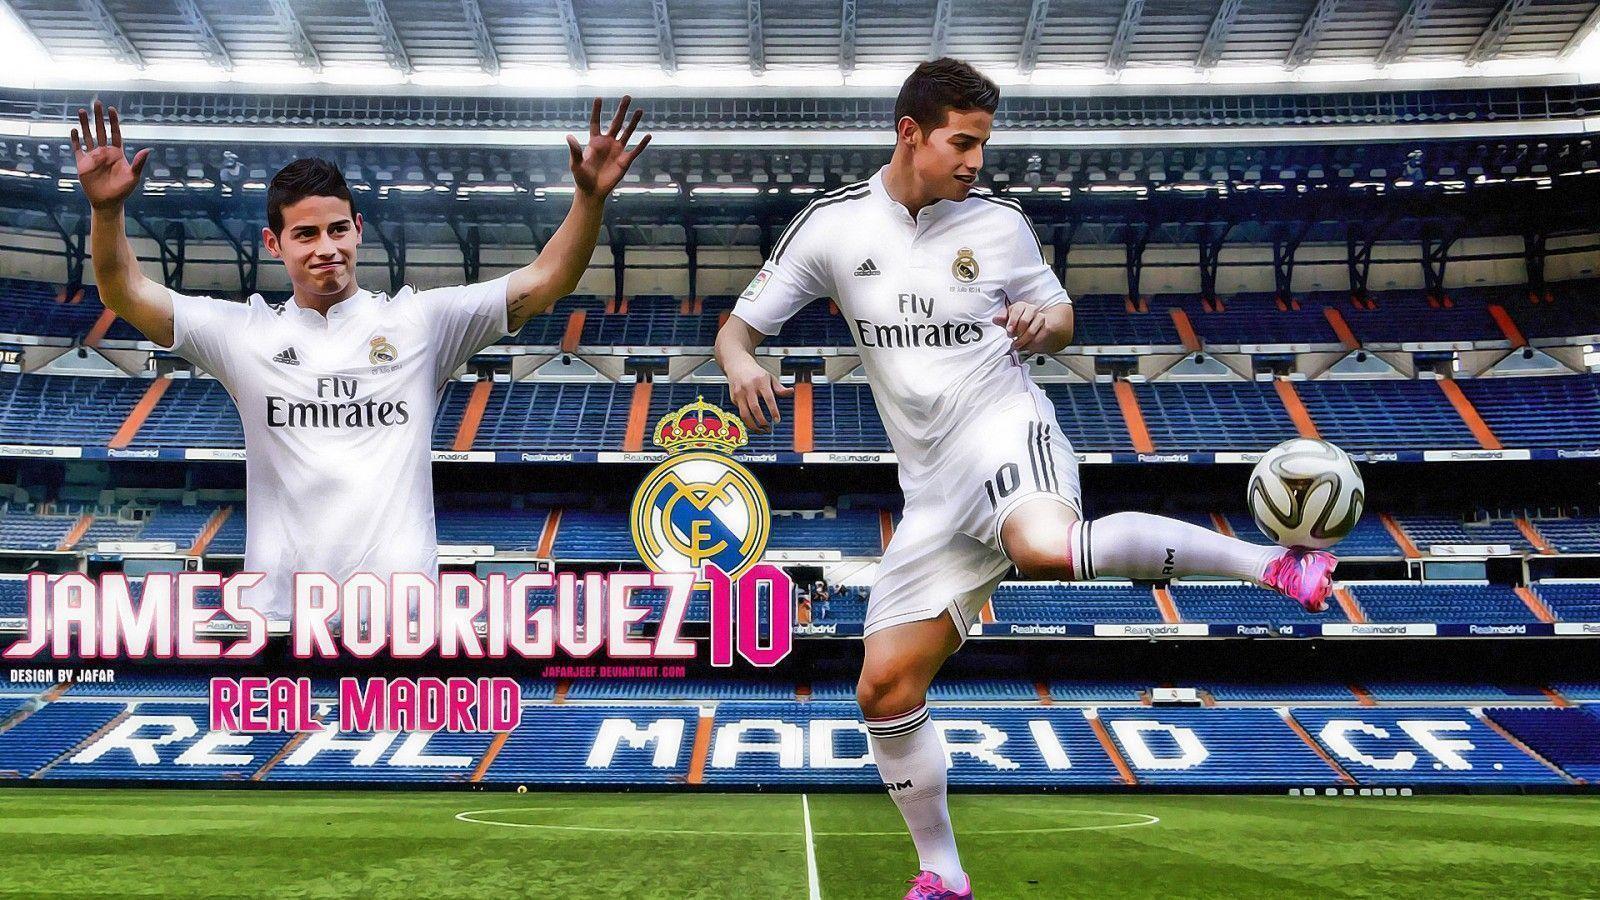 James Rodriguez Real Madrid high quality wallpaper